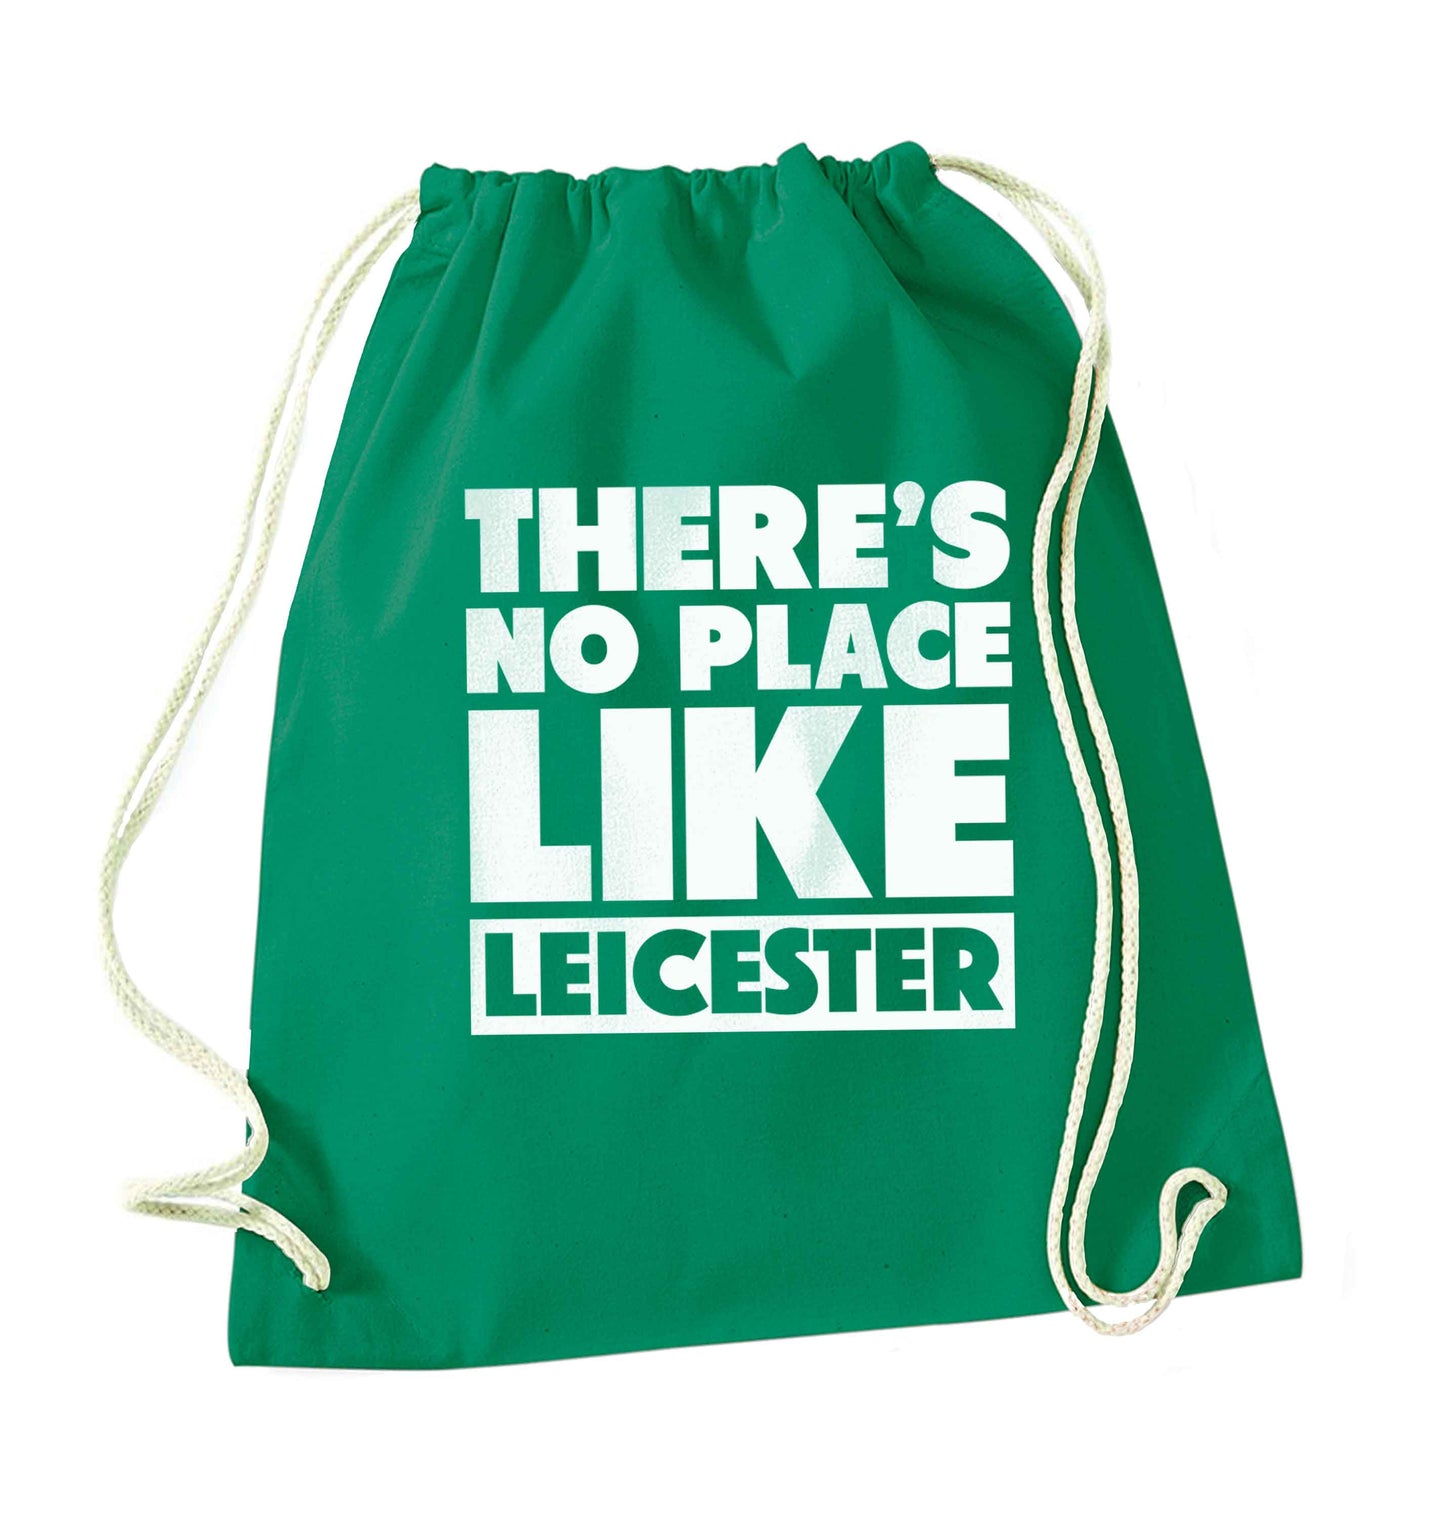 There's no place like Leicester green drawstring bag